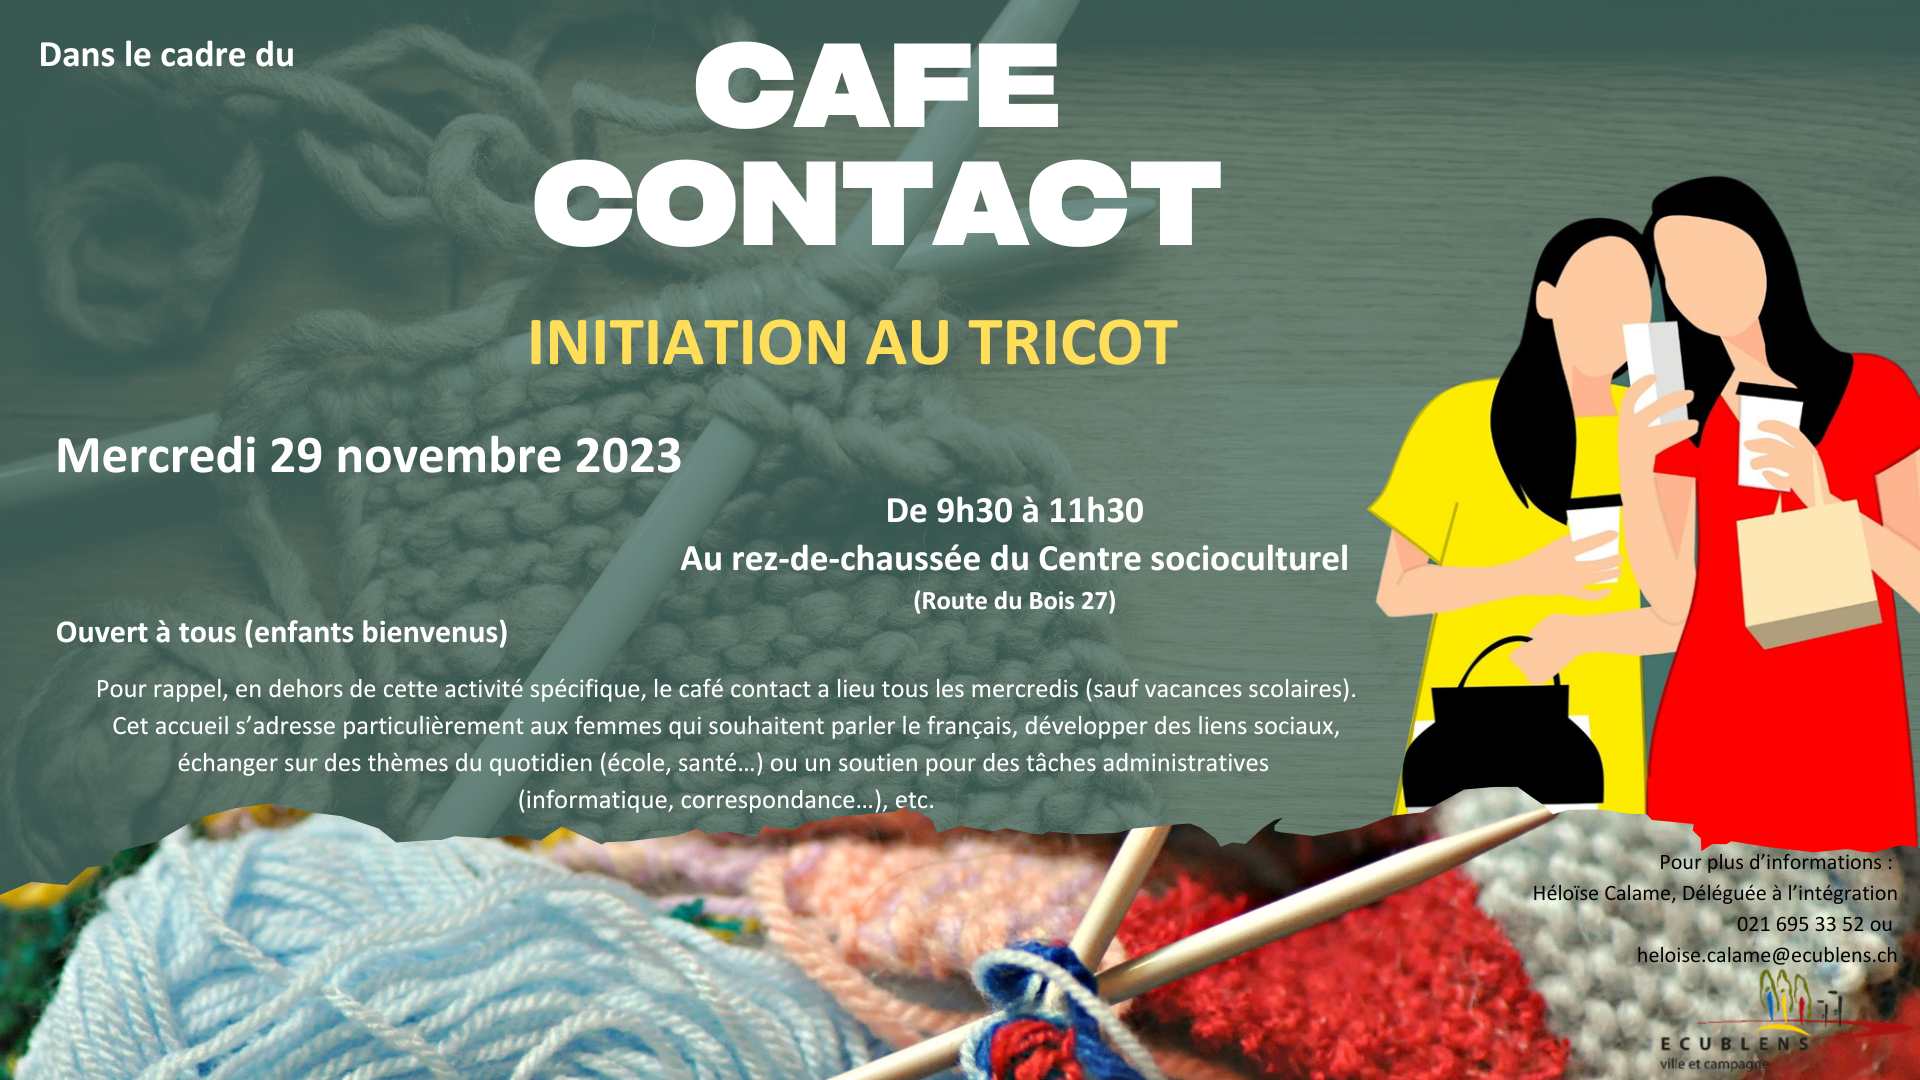 Cafe contact 2023 11 29